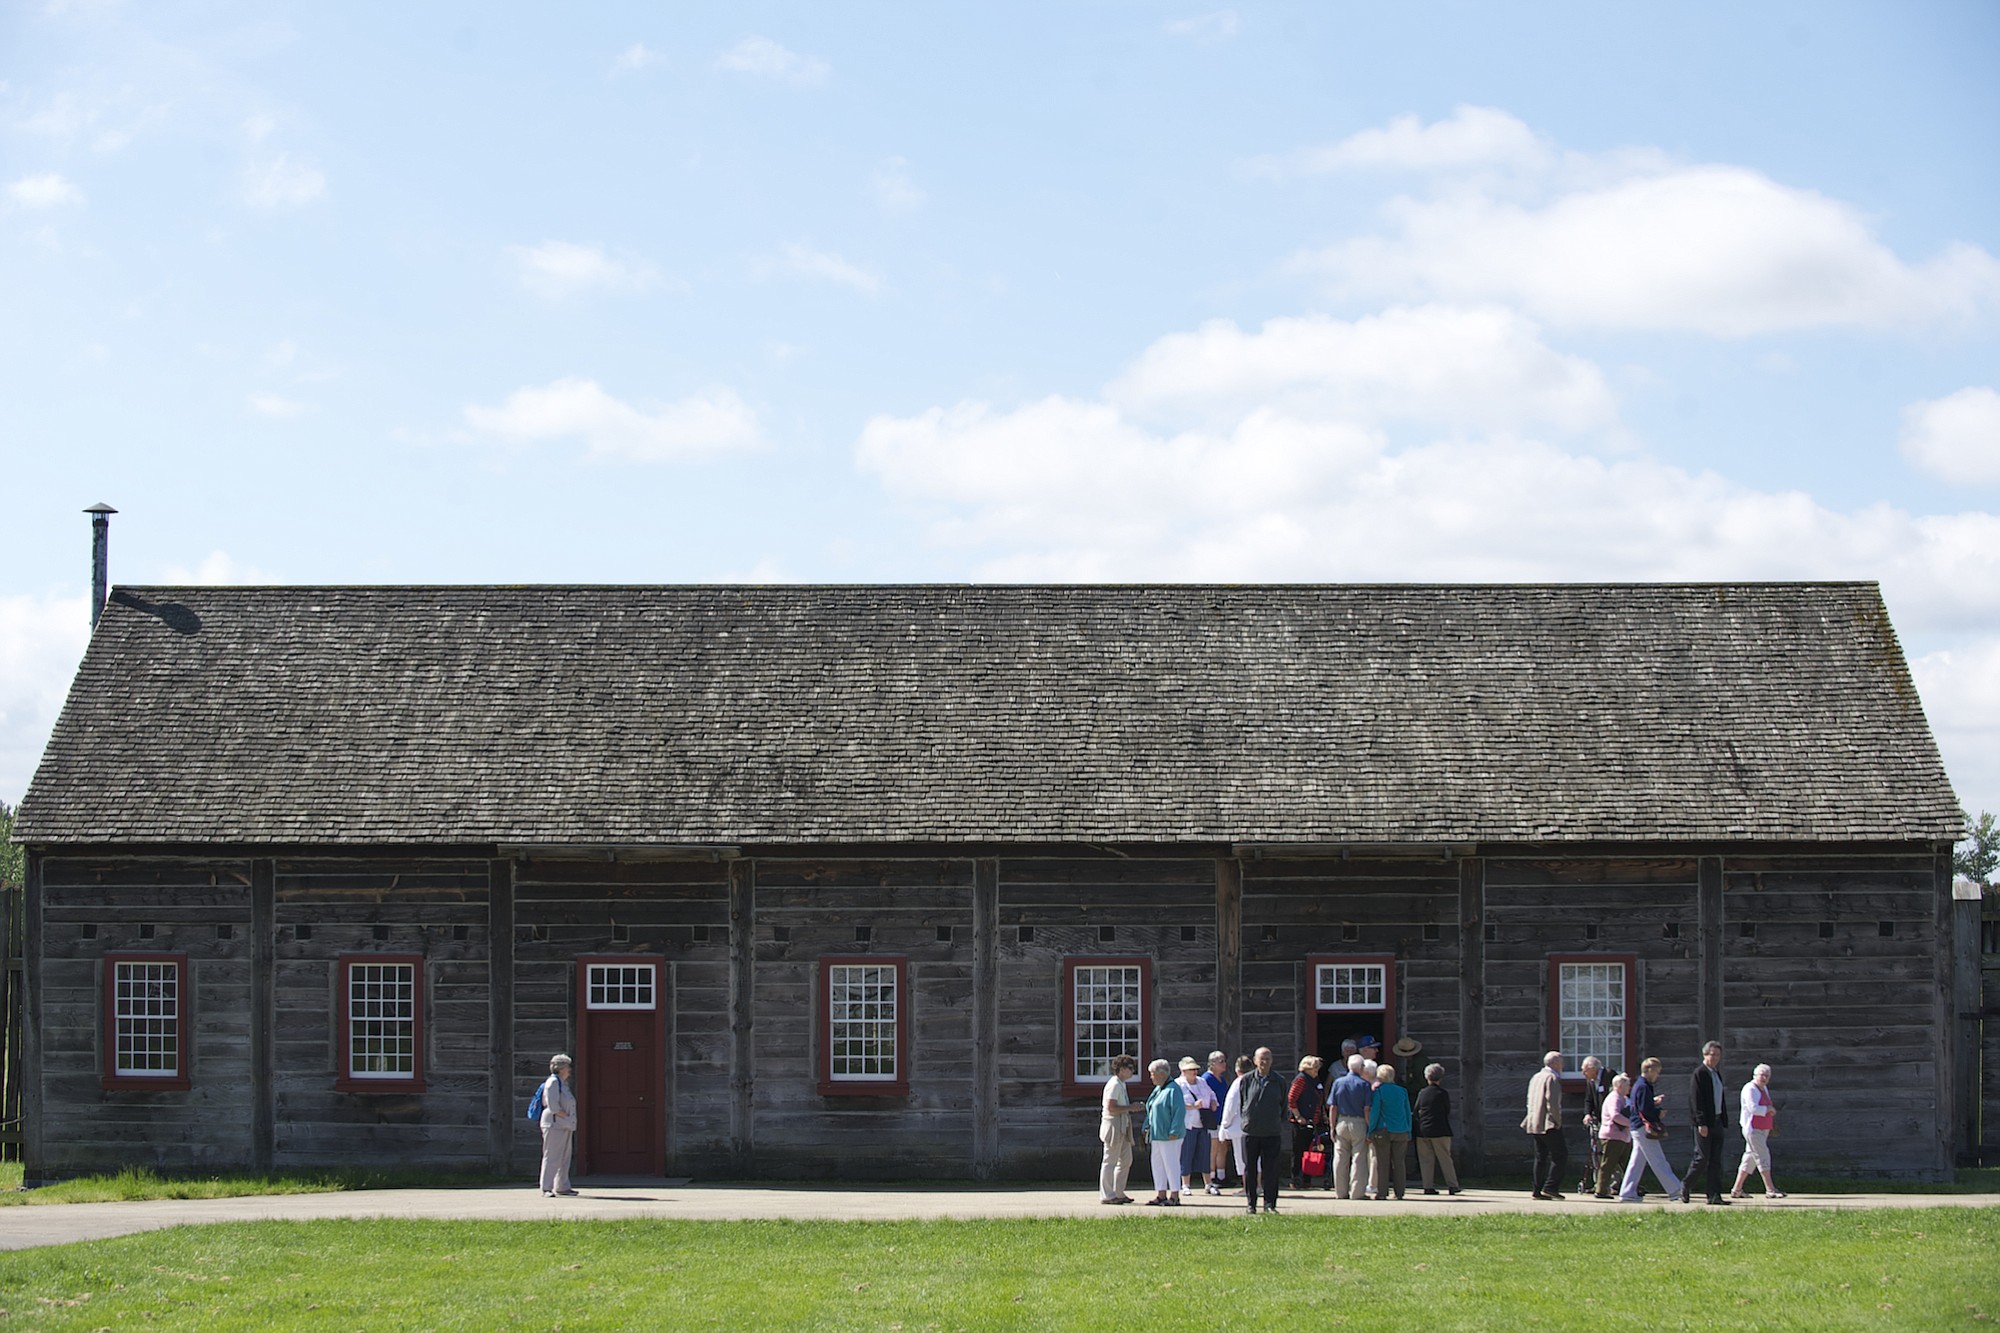 Tourists visit the Fort Vancouver National Historic Site in 2014.